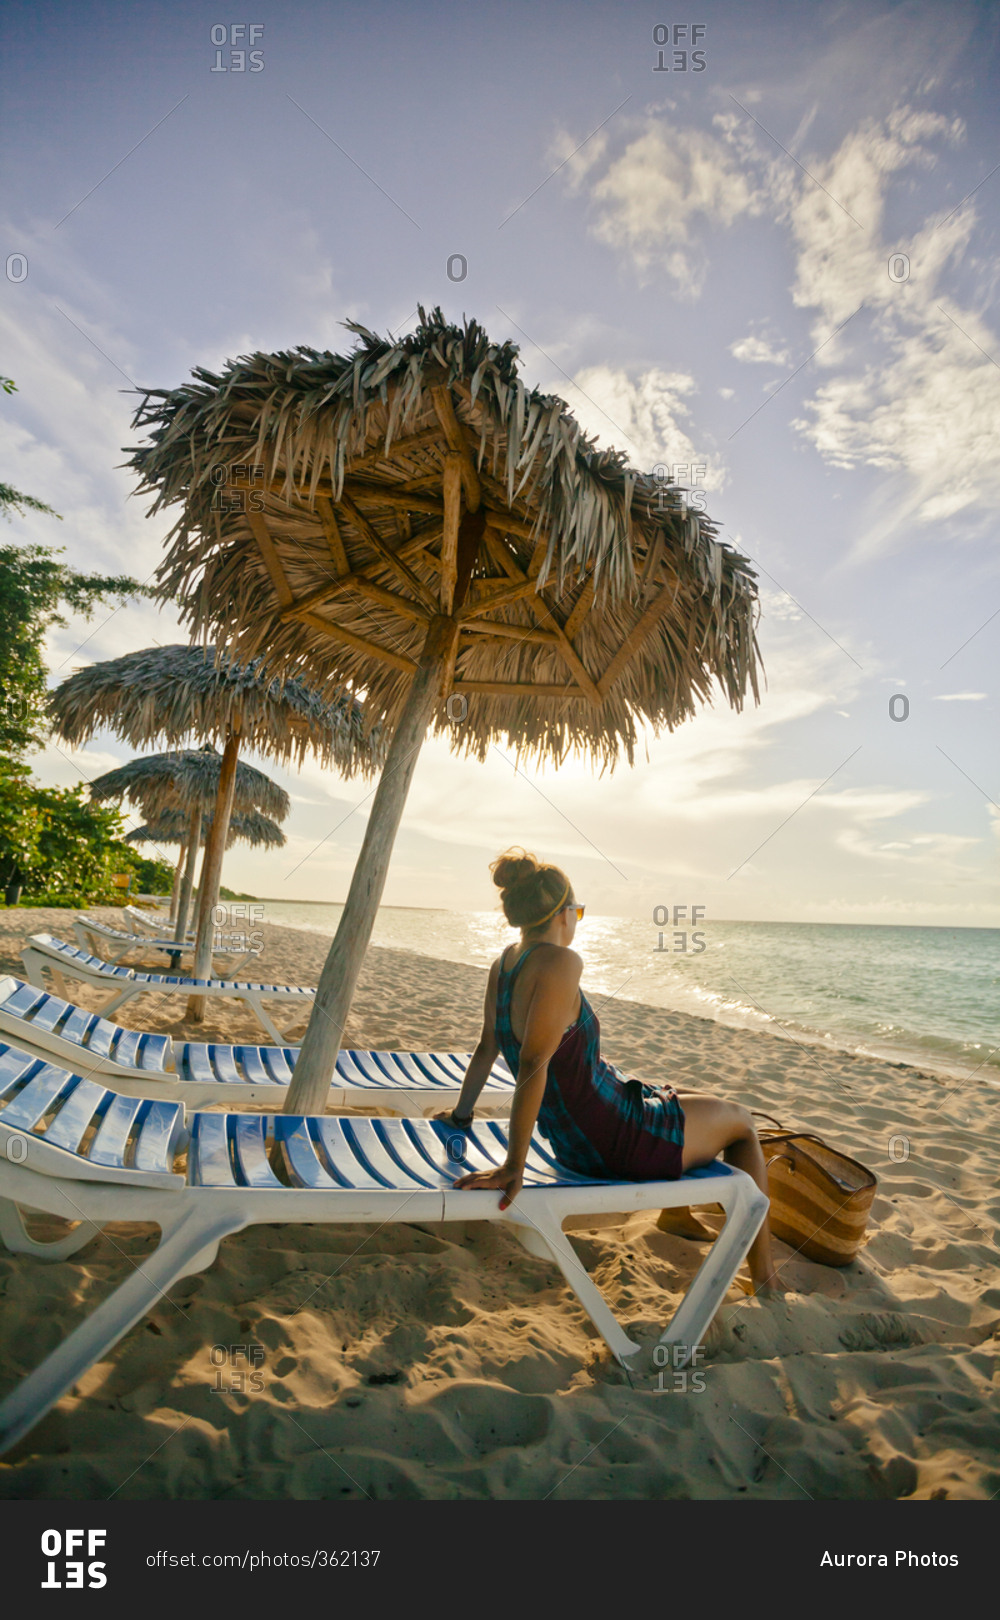 A young woman relaxing on the beach under a beach umbrella in Cayo Coco, Cuba